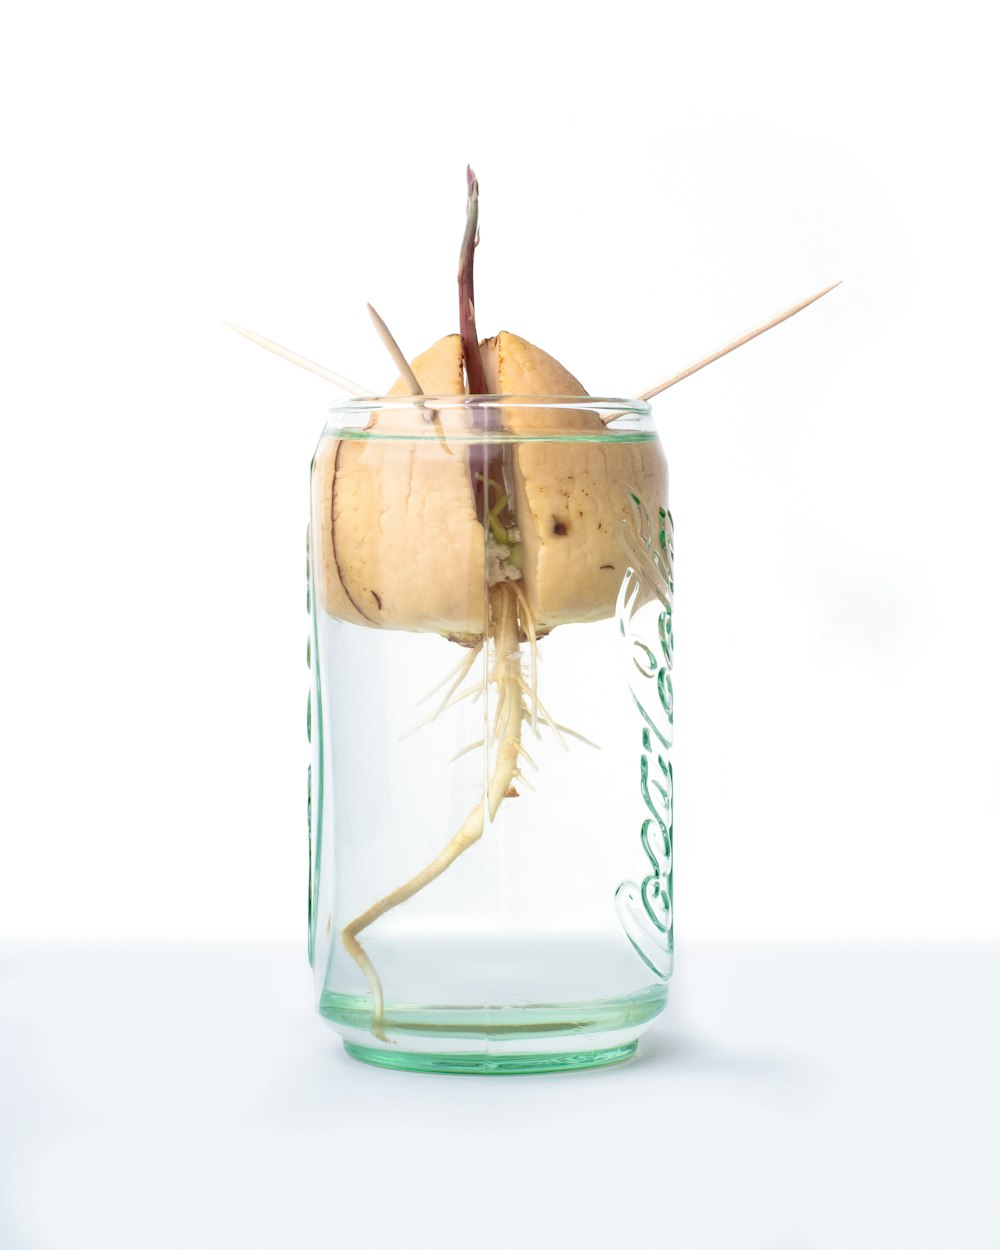 seed on drinking glass with toothpicks